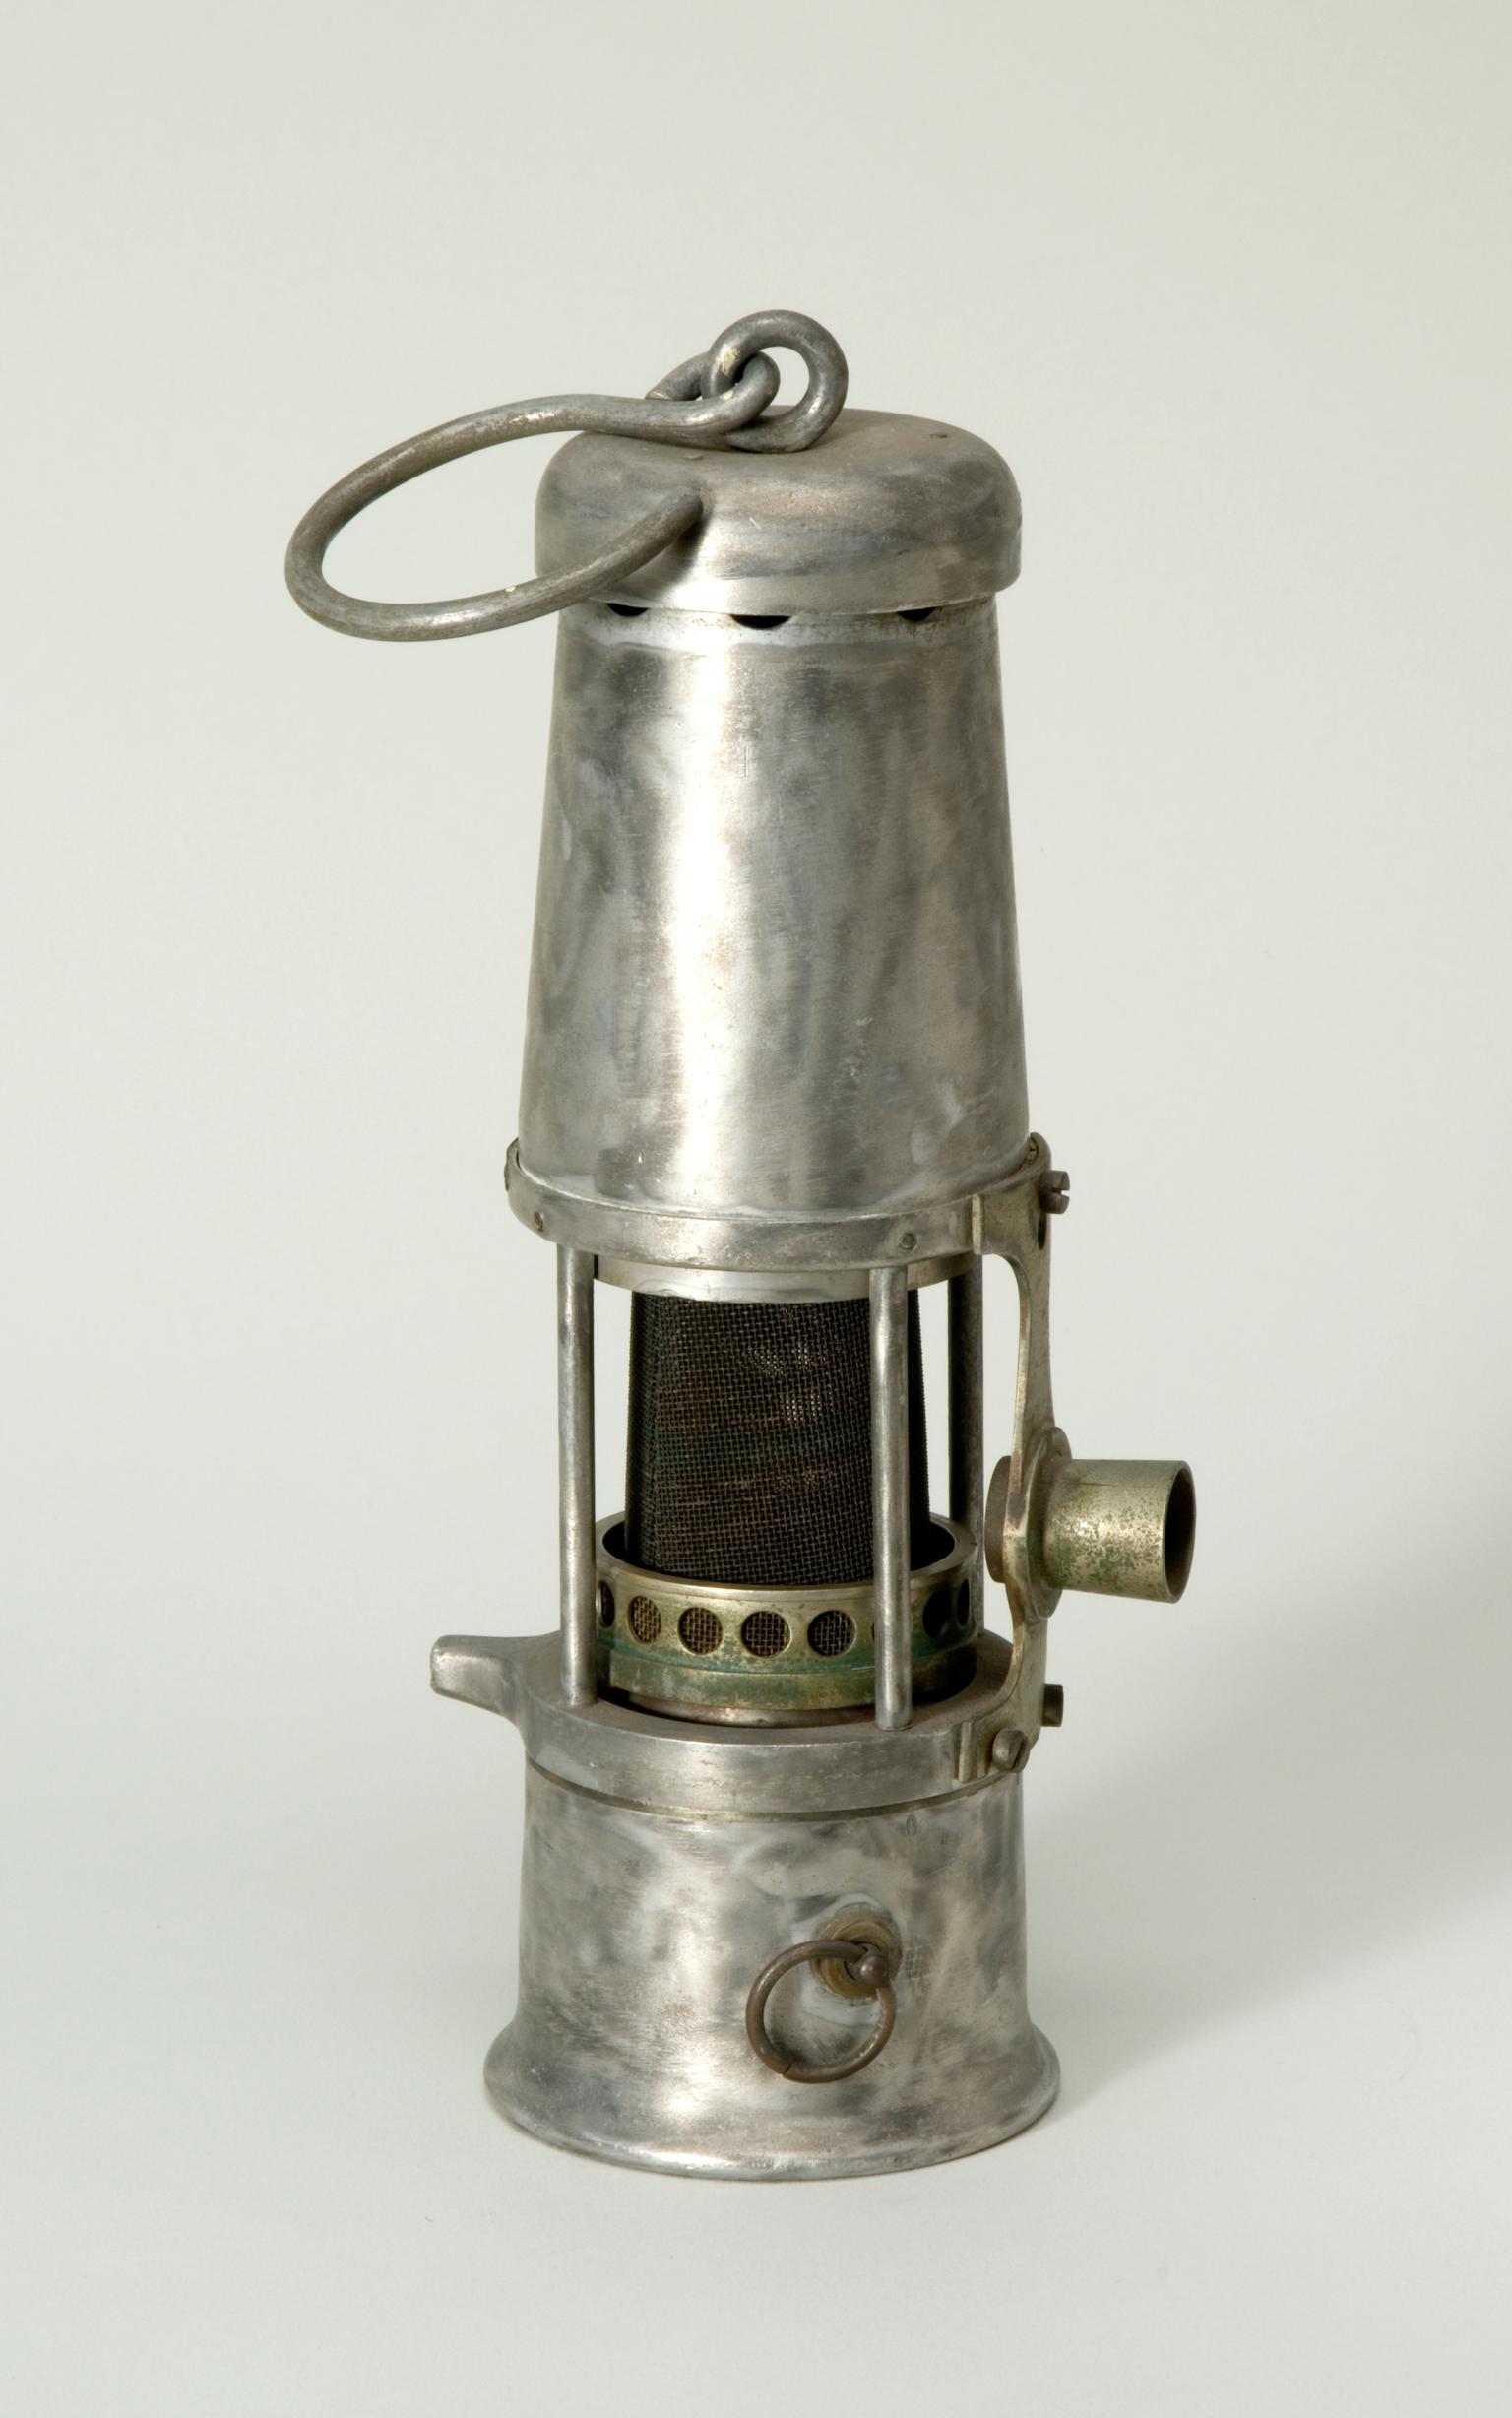 Flame safety lamp